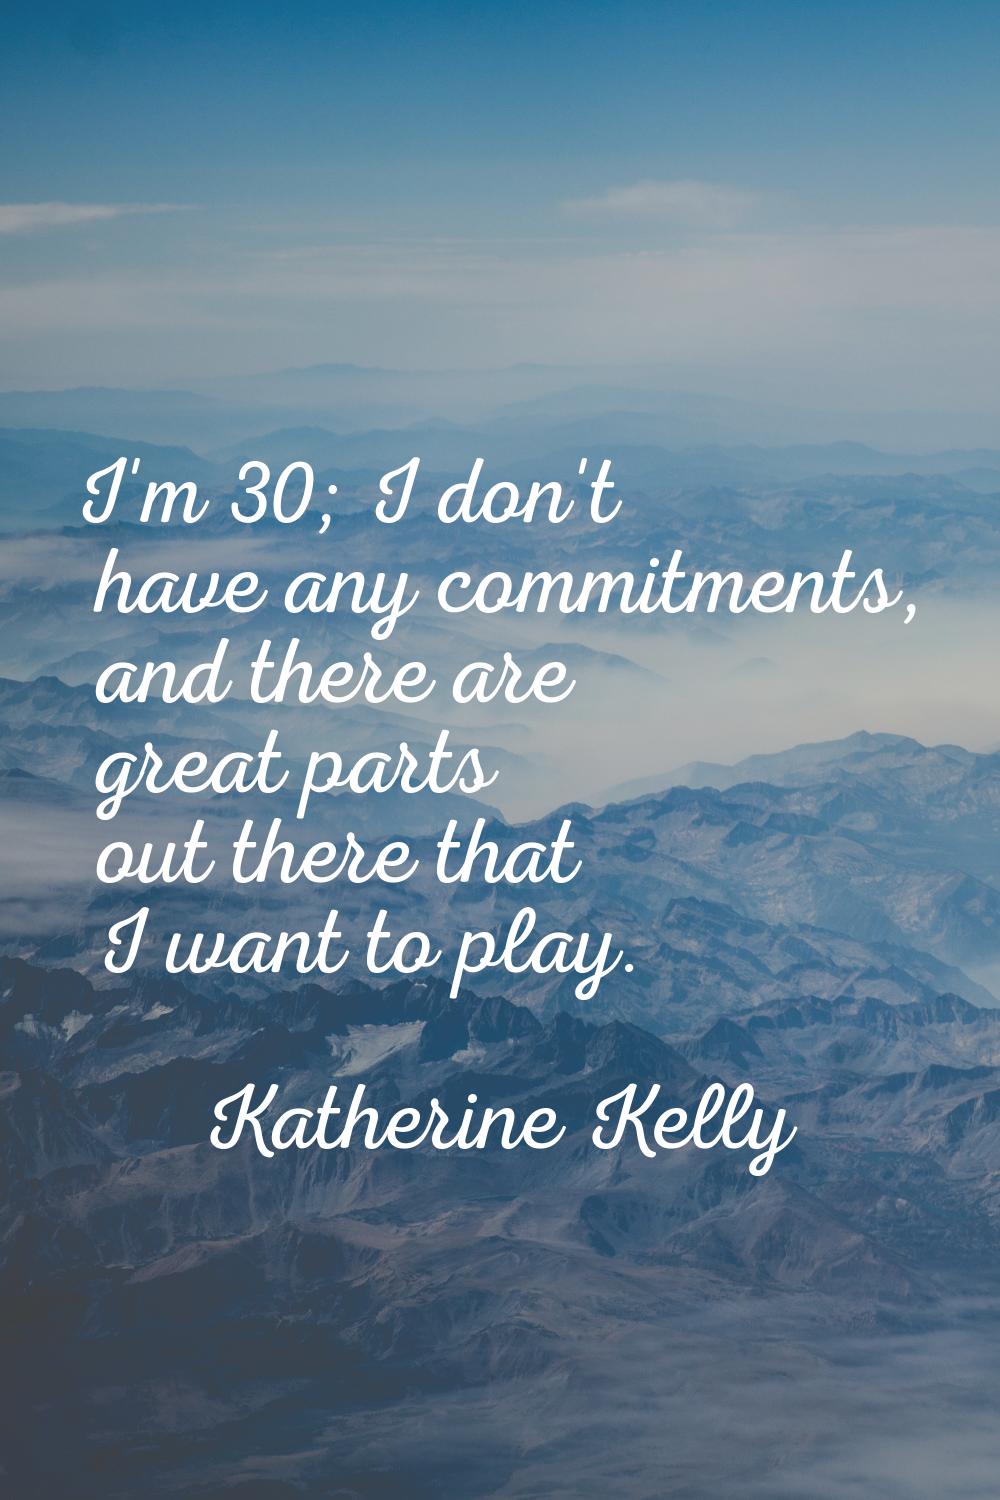 I'm 30; I don't have any commitments, and there are great parts out there that I want to play.